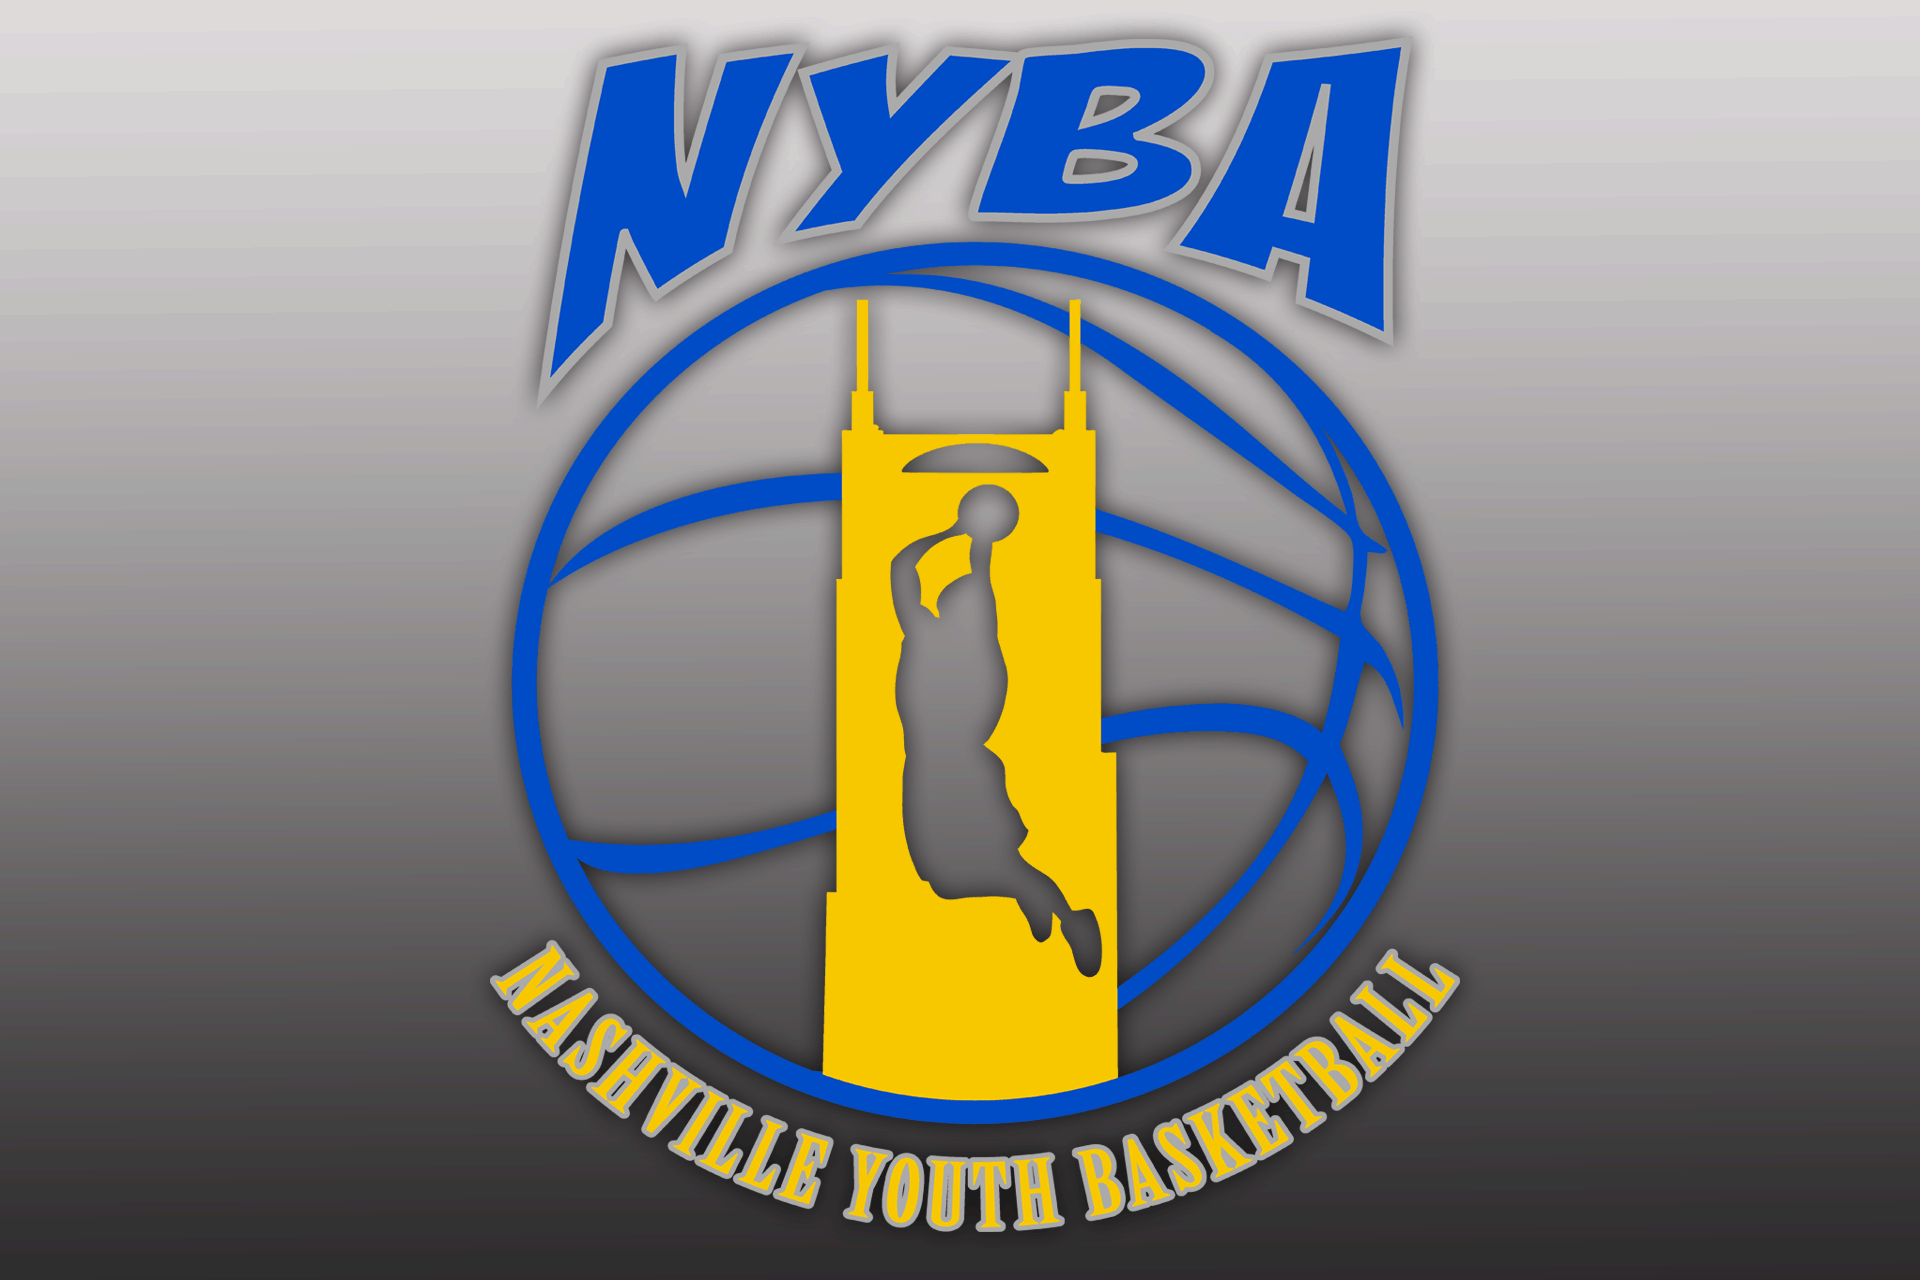 WELCOME TO THE NYBA